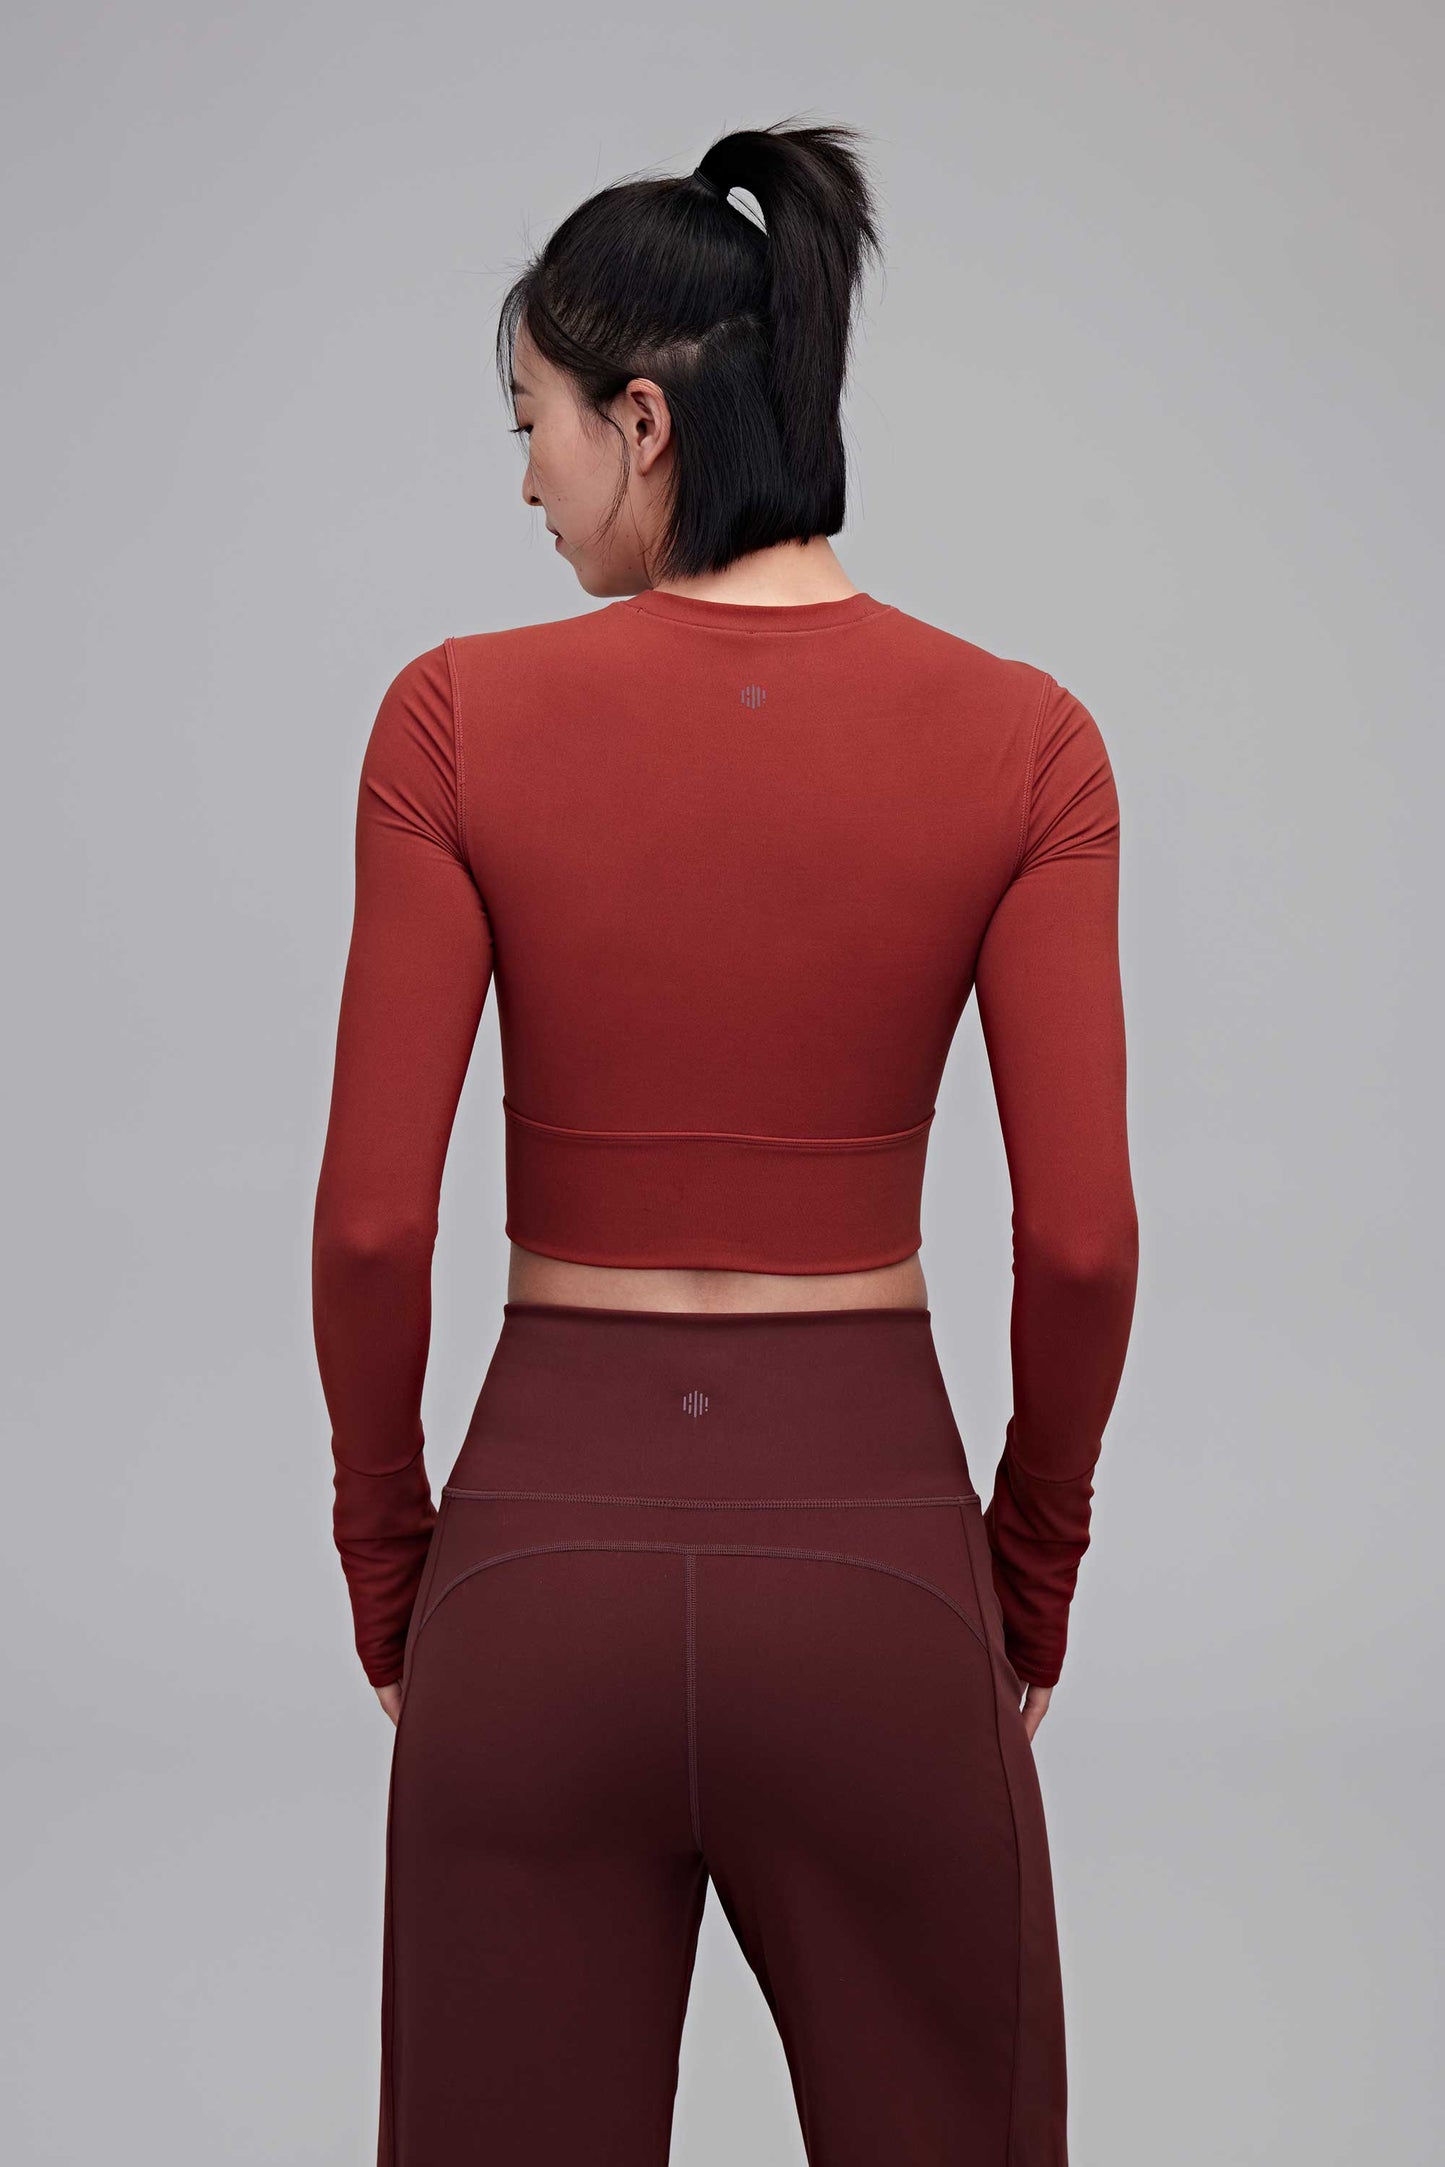 back of the red top